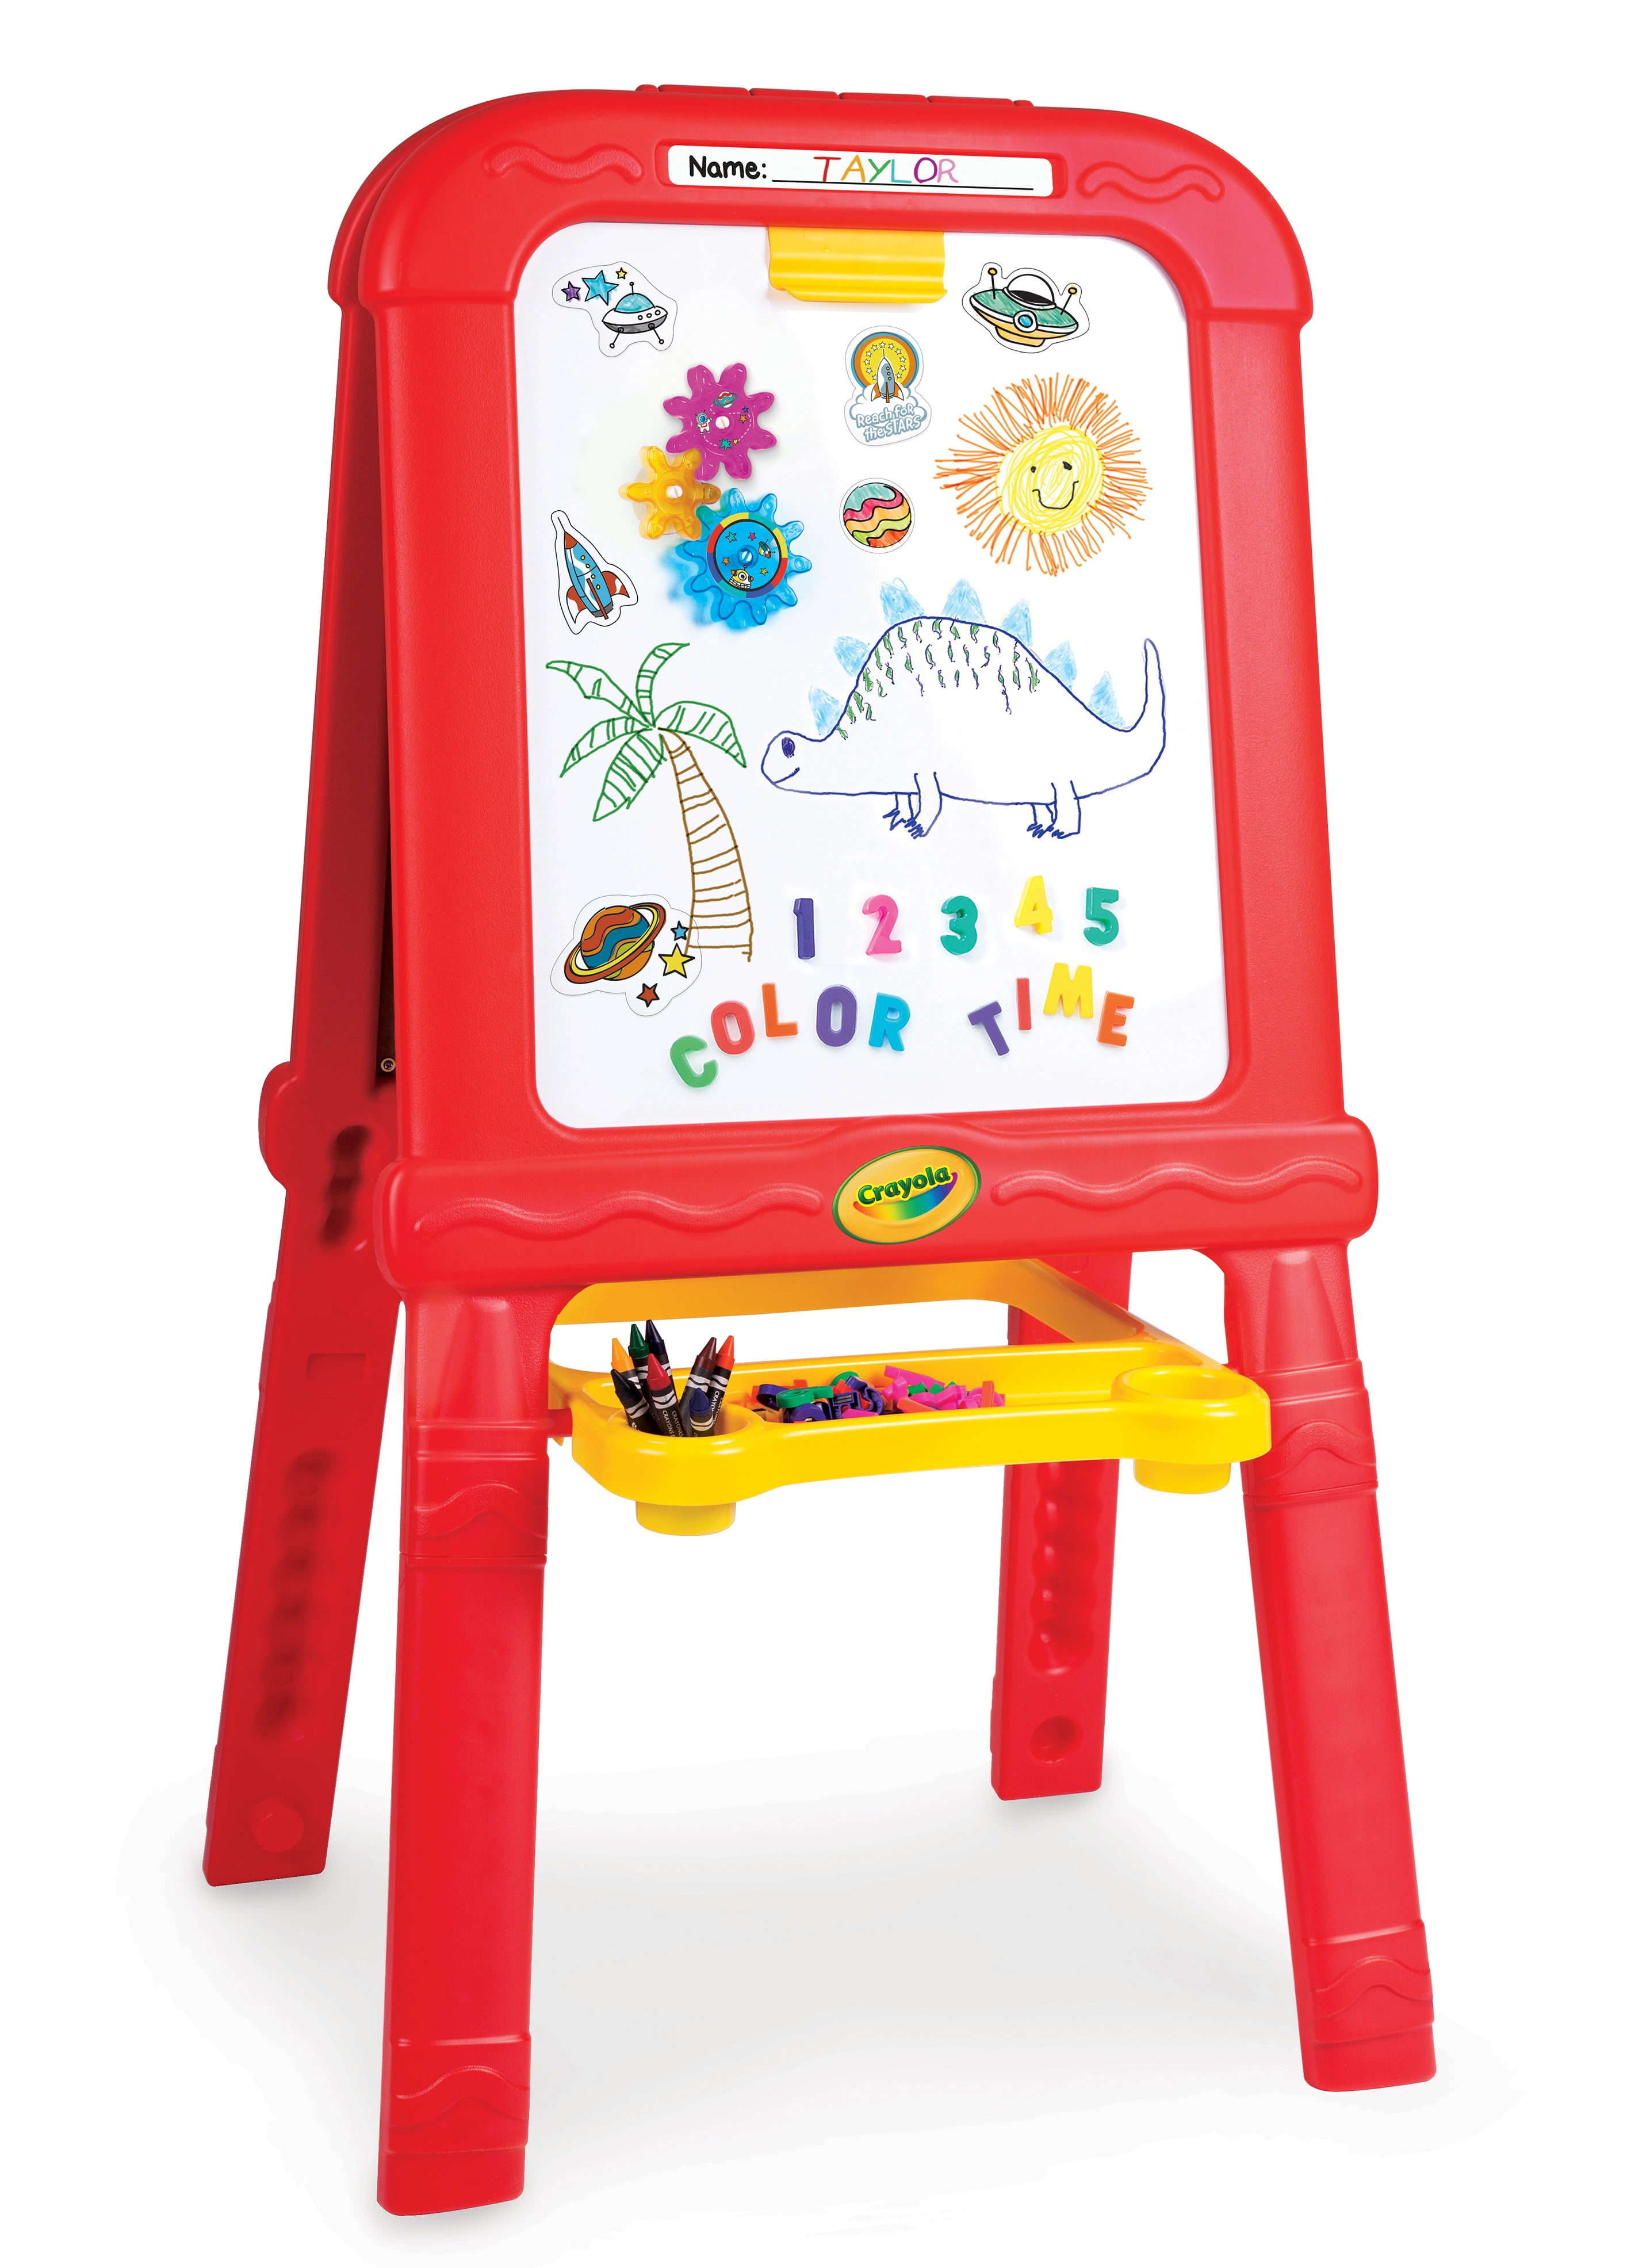 Crayola 2 Sided Easel Drawing Board Art Craft Childrens Play Room Painting Gift 